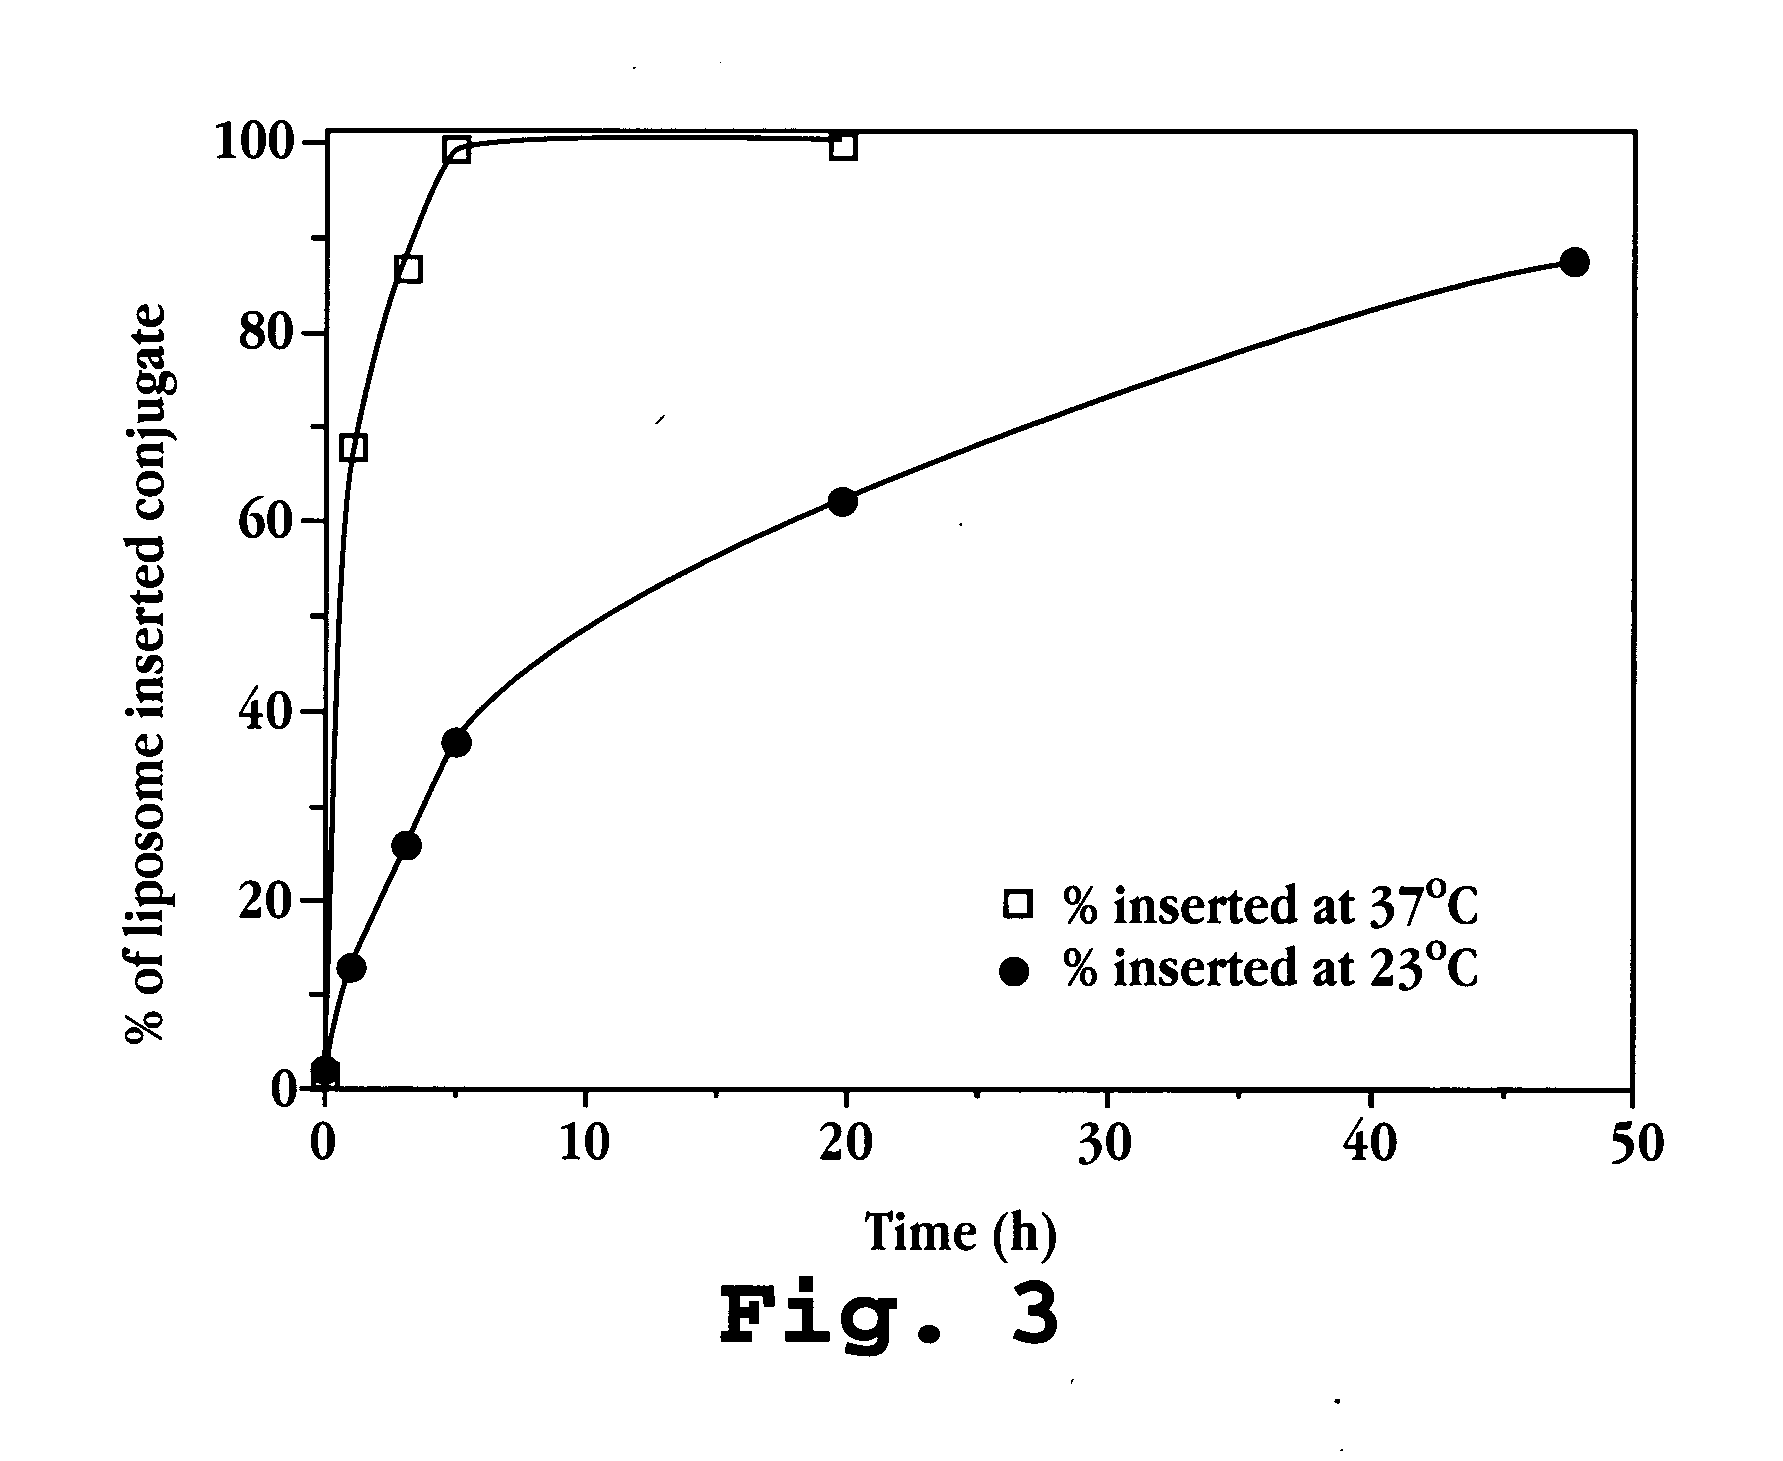 Therapeutic liposome composition and method of preparation